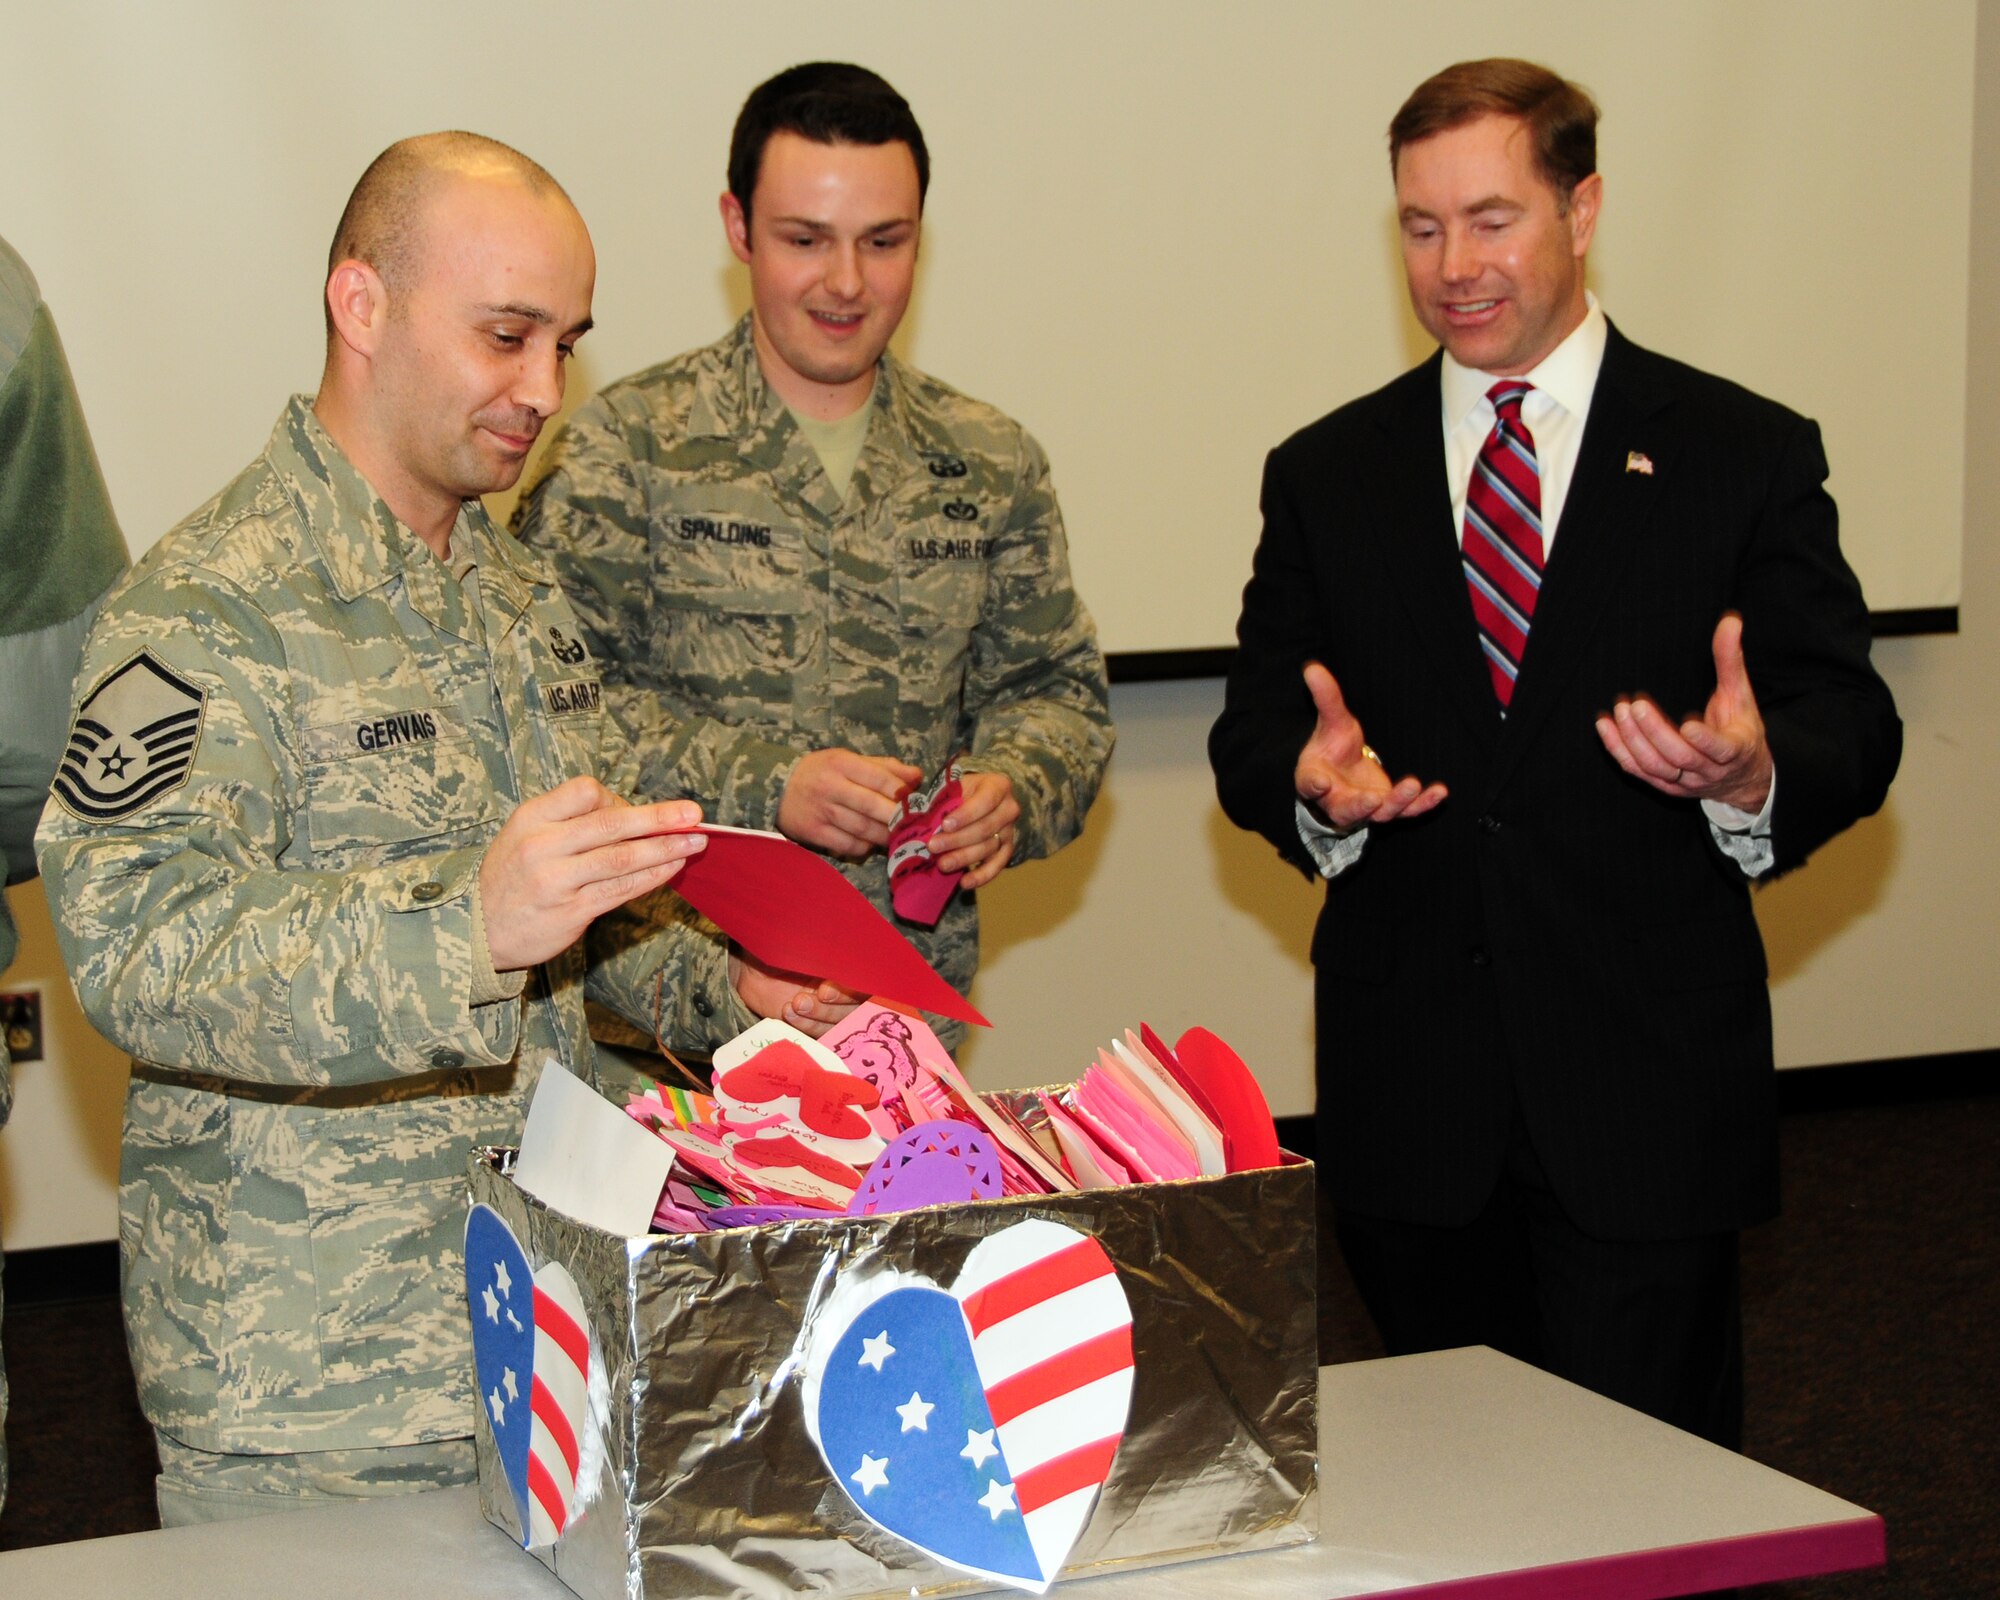 Edward A. Rath III, Erie County Legislator presented Valentine day cards to members of the 914th and 107th Airlift Wings during a presentation at the Niagara Falls Air Reserve Station on February 14, 2013. The cards were hand made by participating Western New York elementary school children. The "Valentines for Vets" Program is in its third year and has been distributed to local veterans and those overseas. (U.S. Air Force photo by Peter Borys)